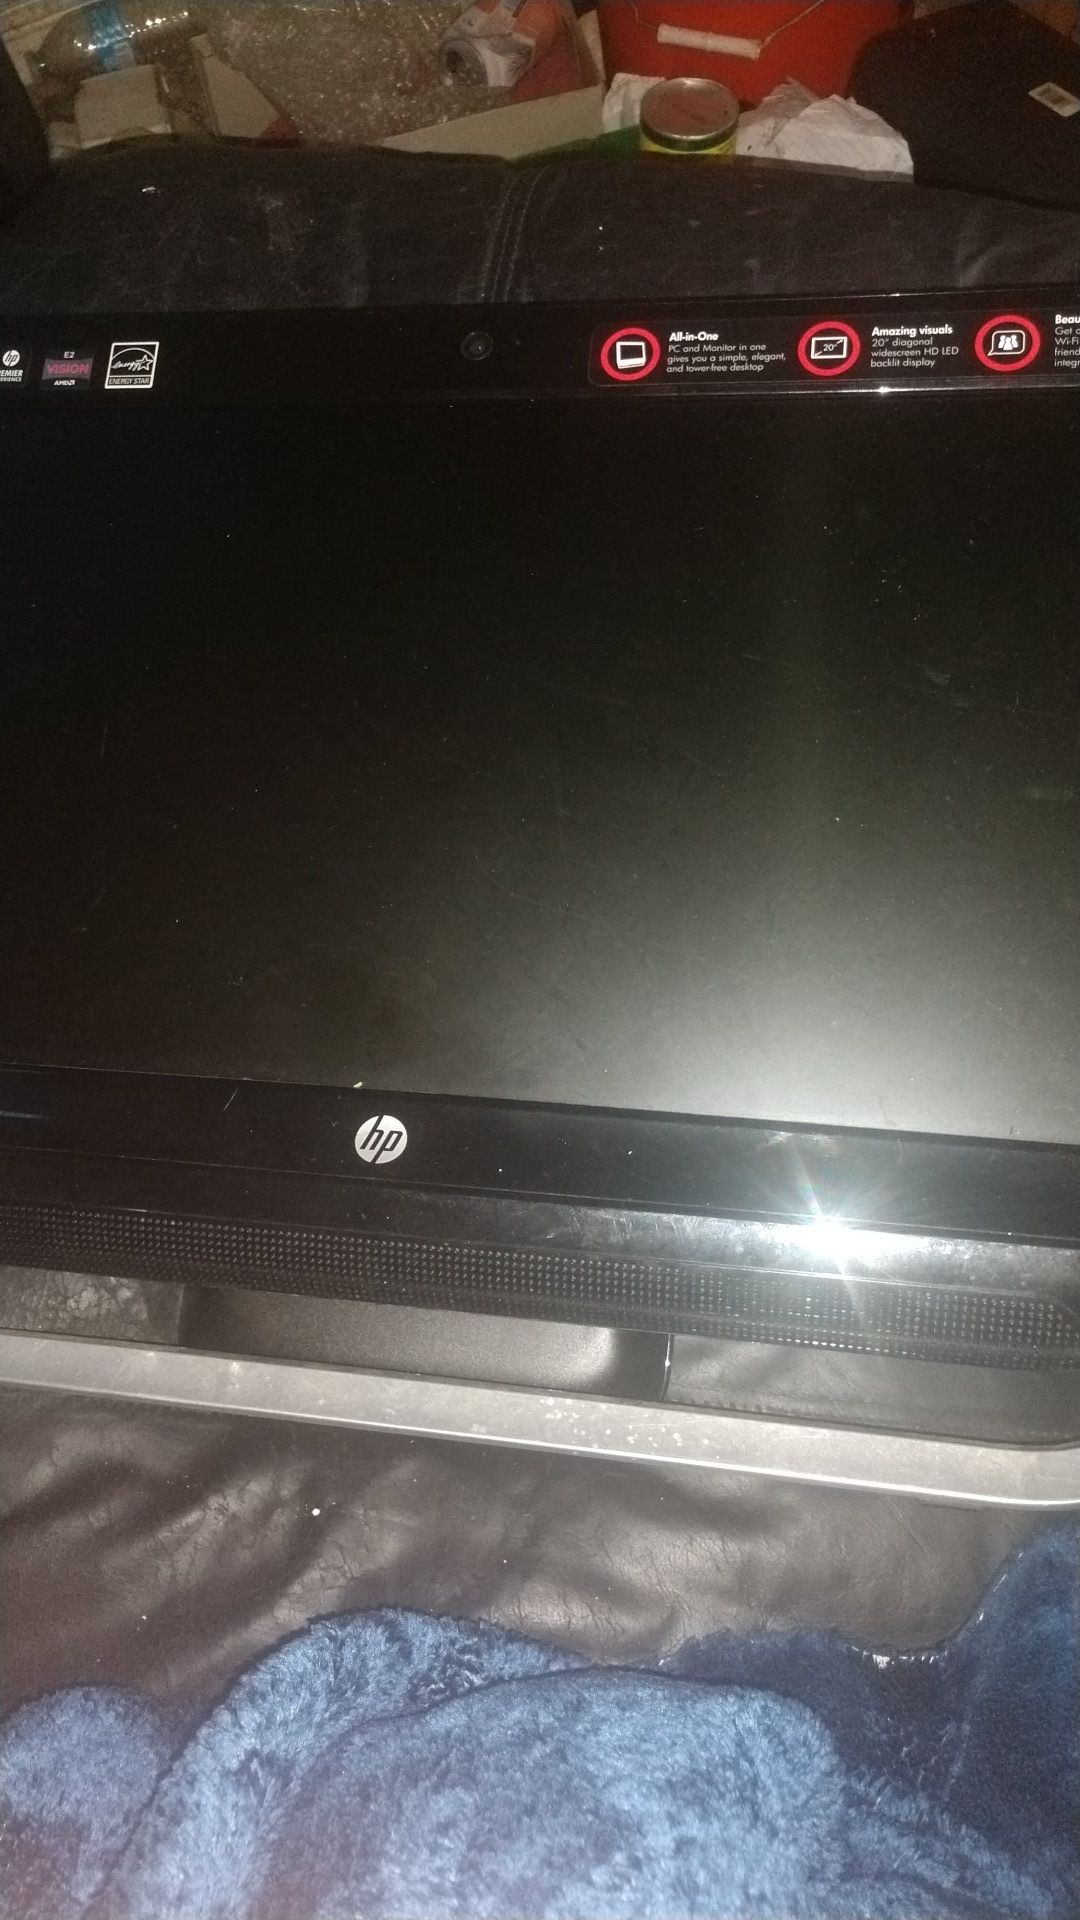 HP Computer with movies and games